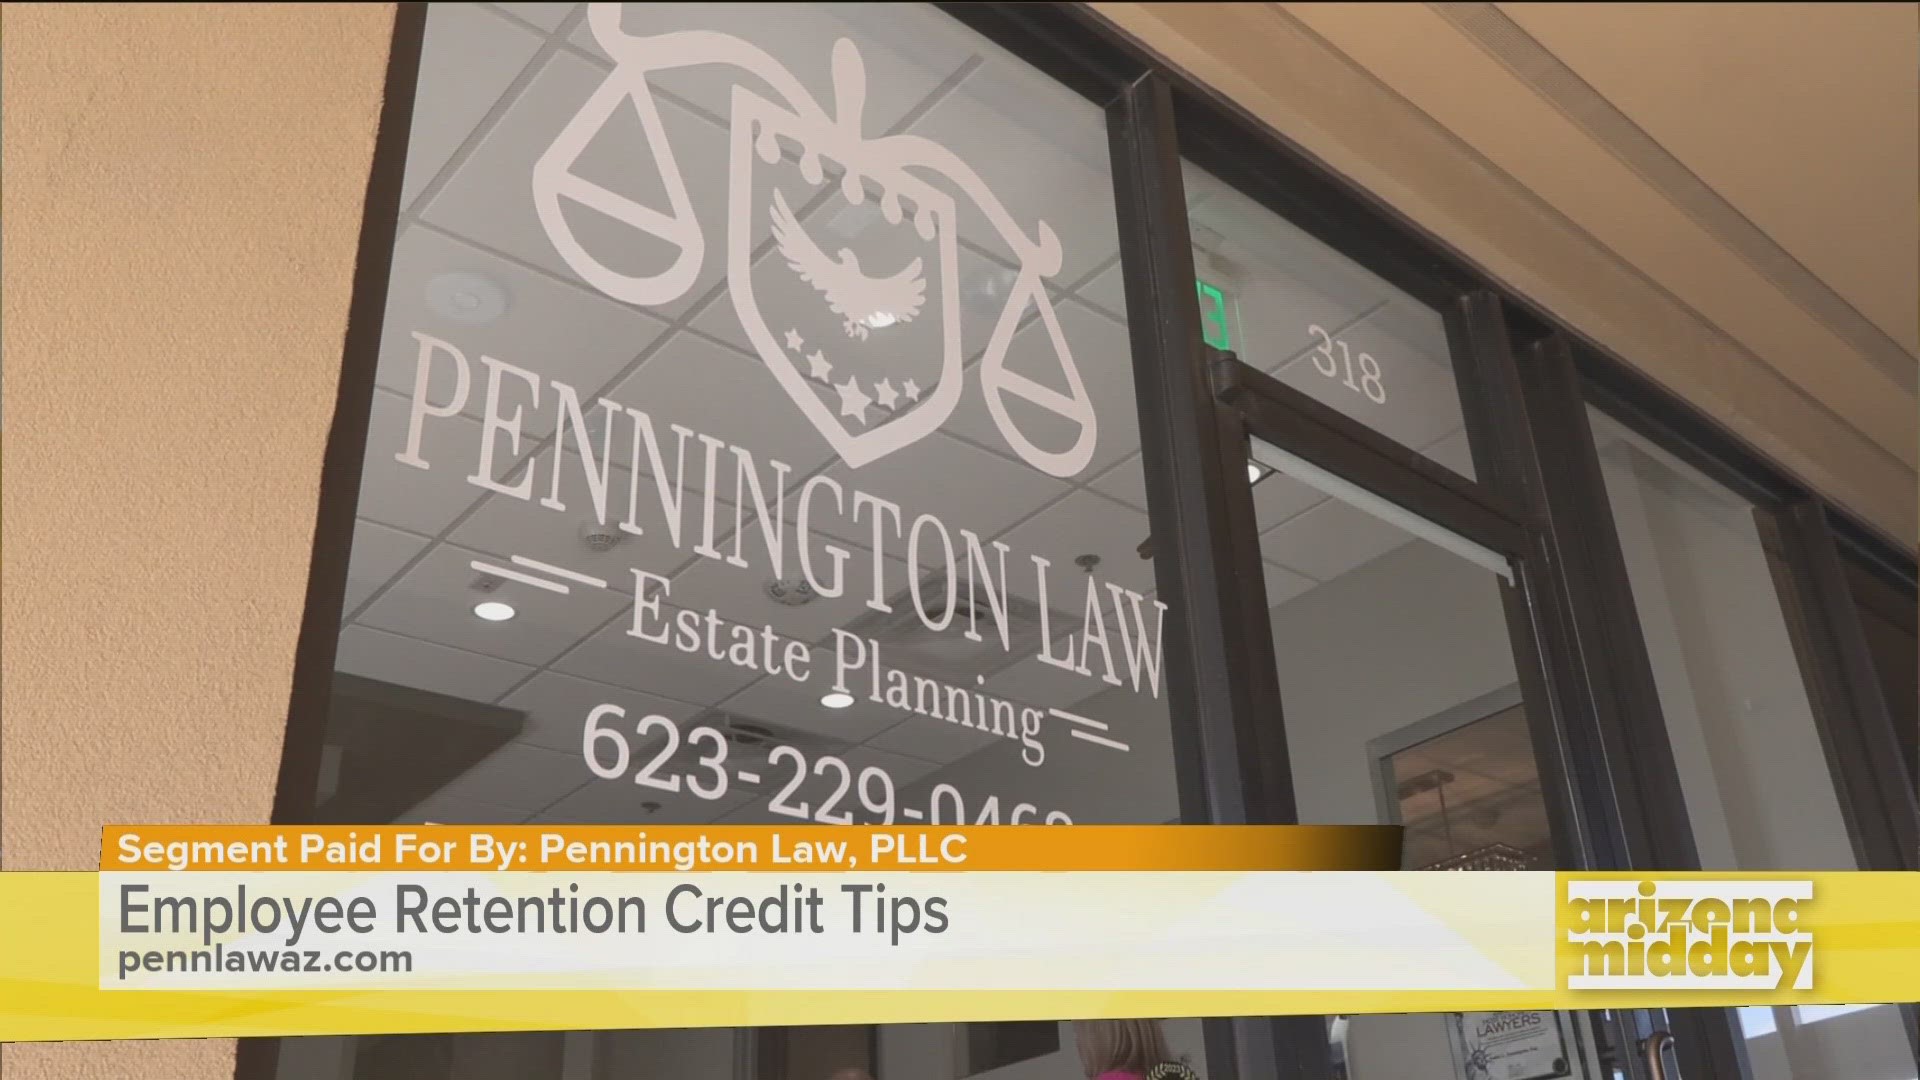 Andre L. Pennington with Pennington Law discusses what employee retention credits are and how business owners can take part.